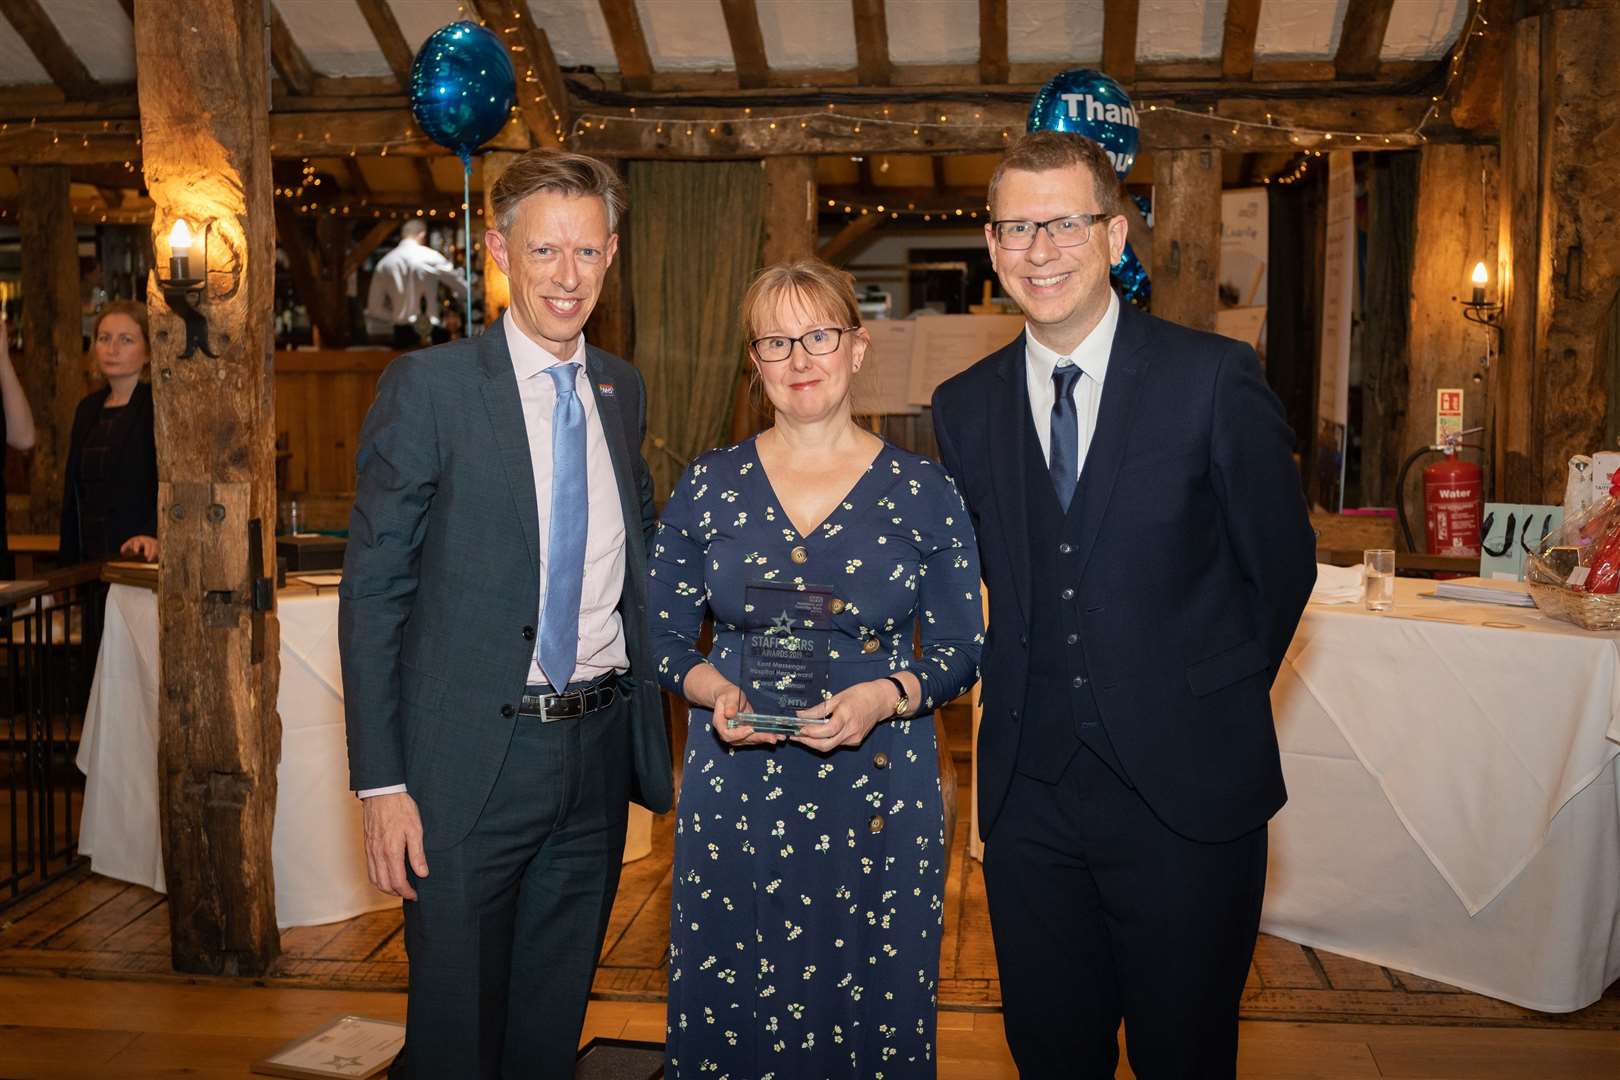 Carol Smallman, paediatric specialist teams matron, won the Tunbridge Wells Hospital Hero award. Pictured with CEO Miles Scott, left, and Paul Kerensa, comedian, right who helped host the event